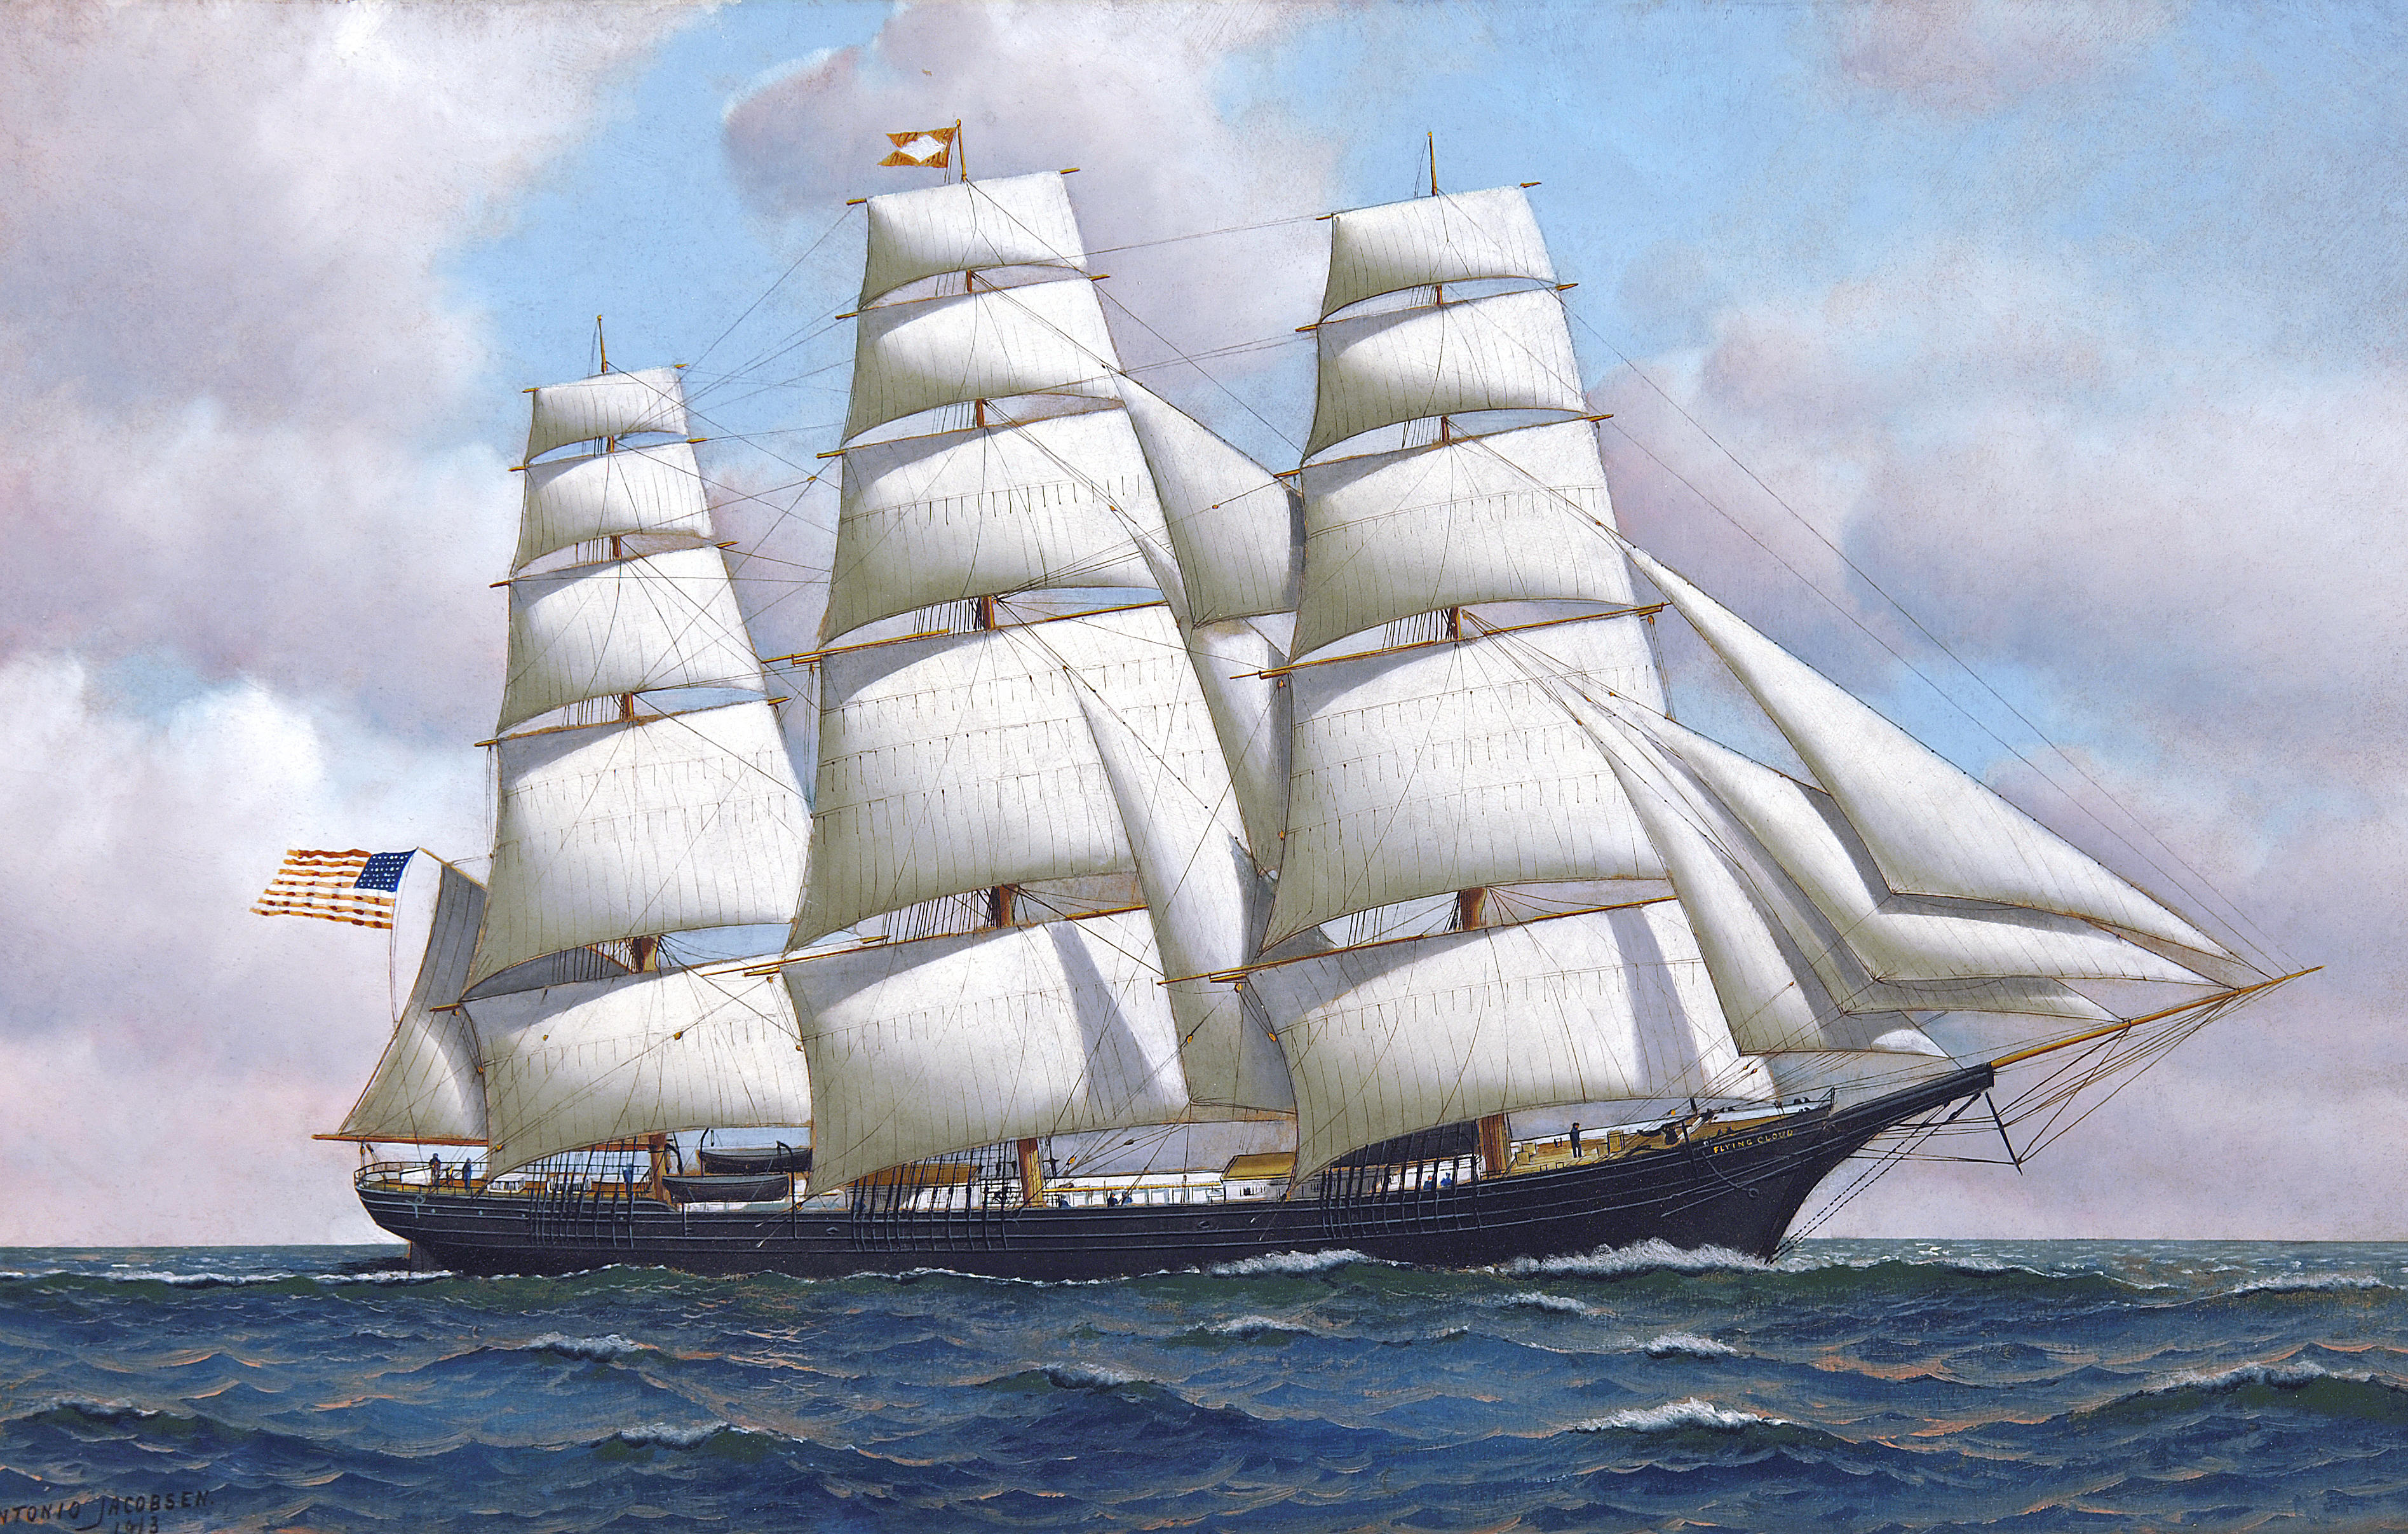 A painting of a ship with large sails and an American flag.